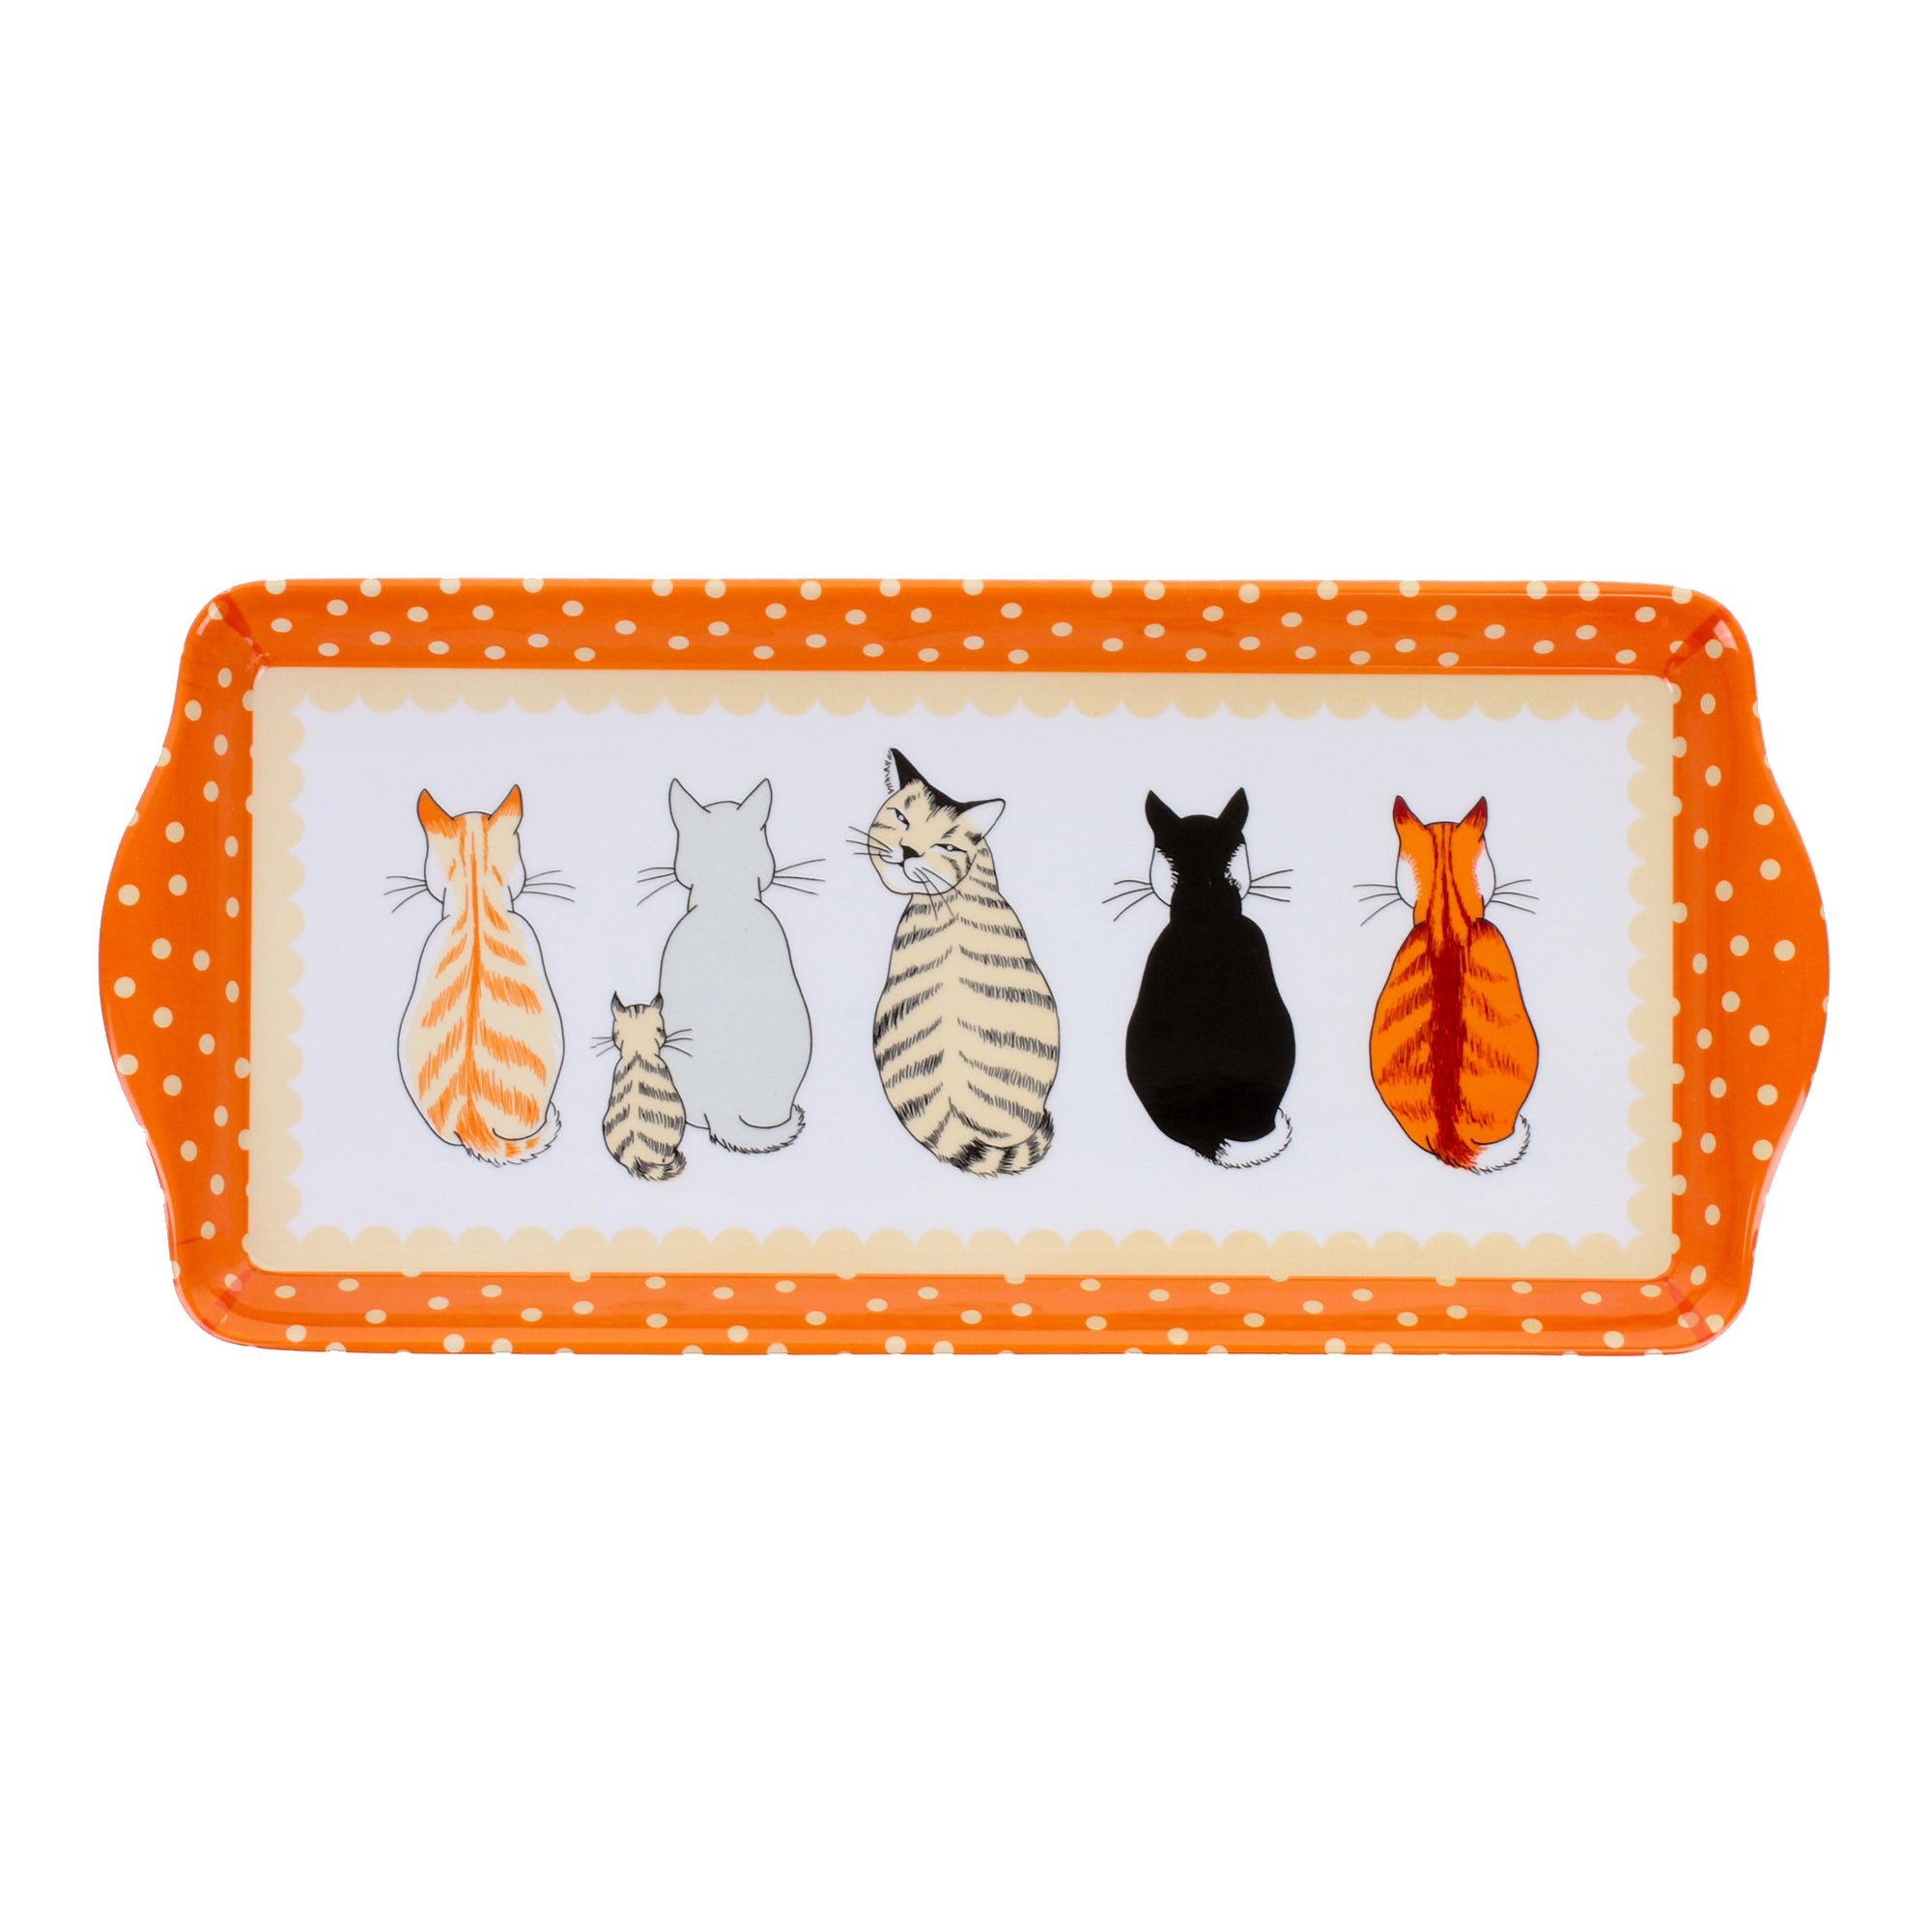 Ulster Weavers Cats in Waiting Small Melamine Tray